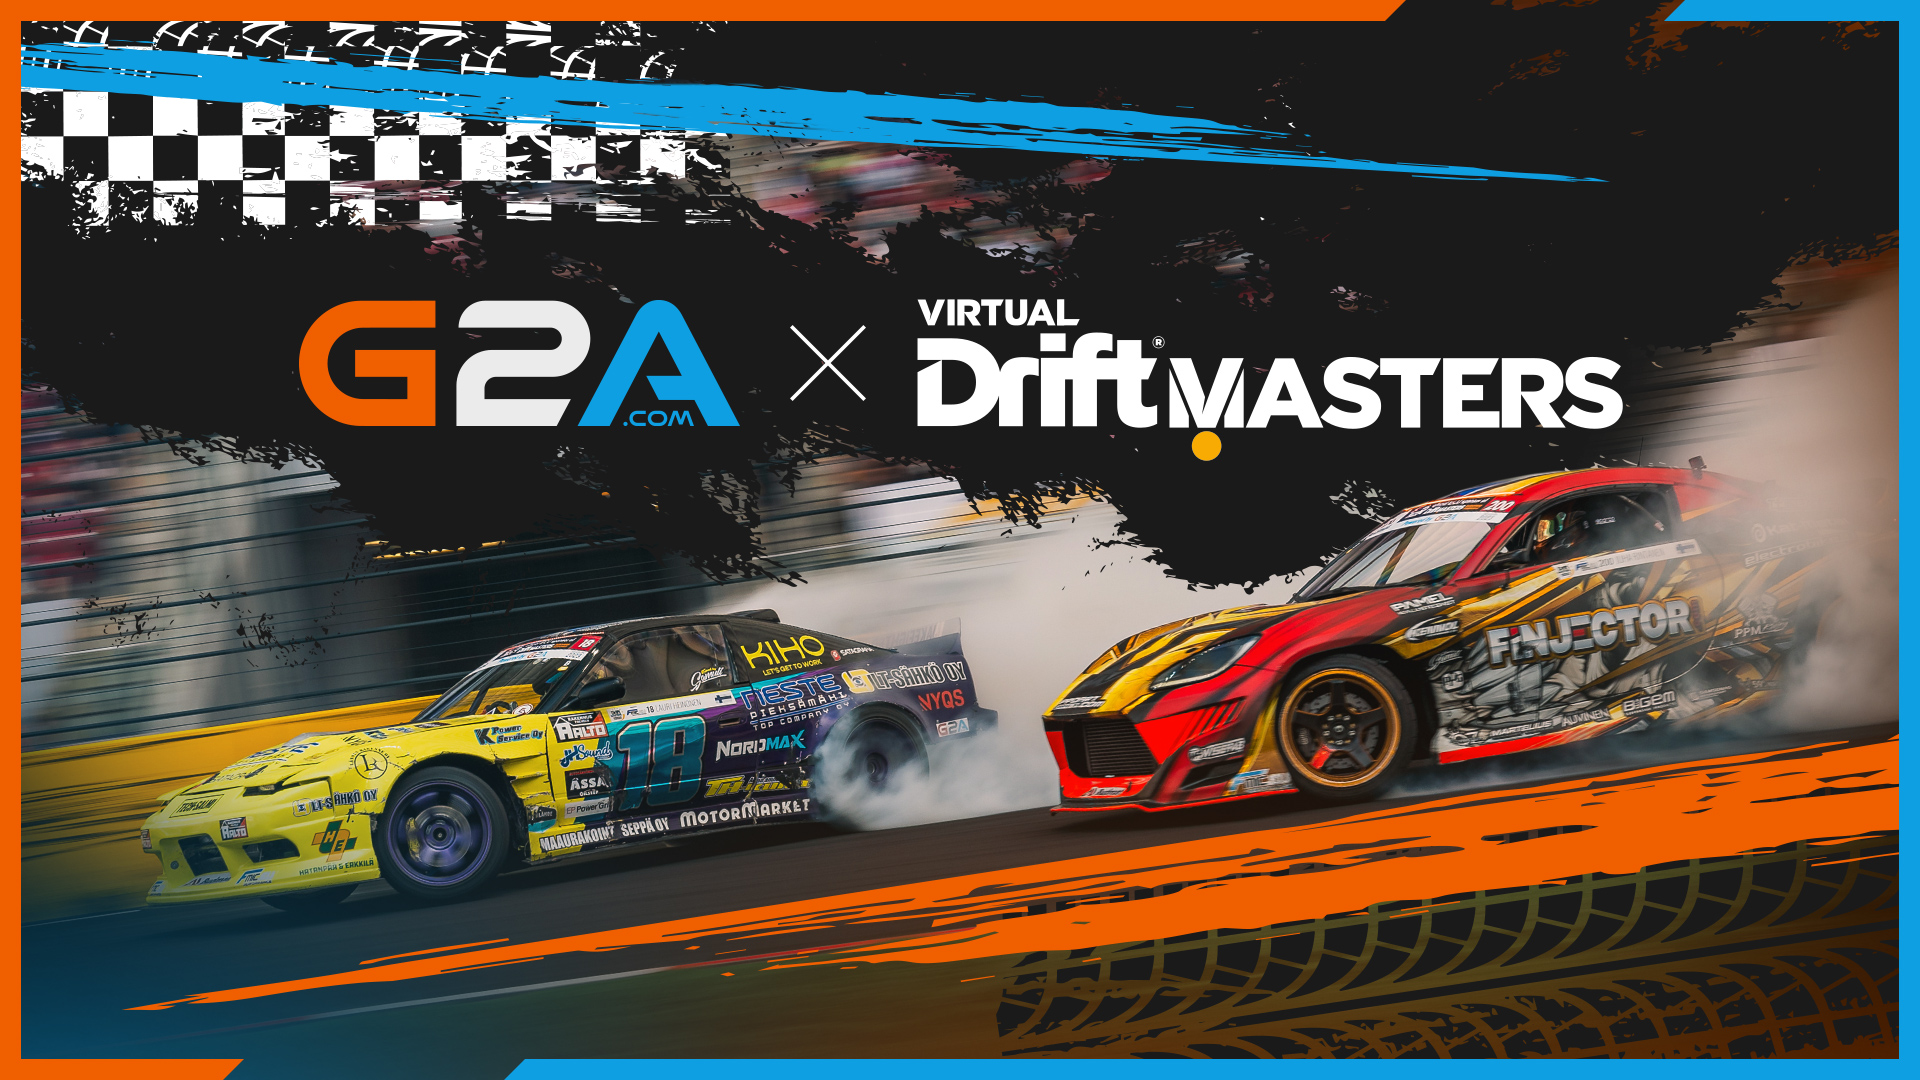 Enhancing gaming and sports experience – G2A.COM partners with Virtual Drift Masters